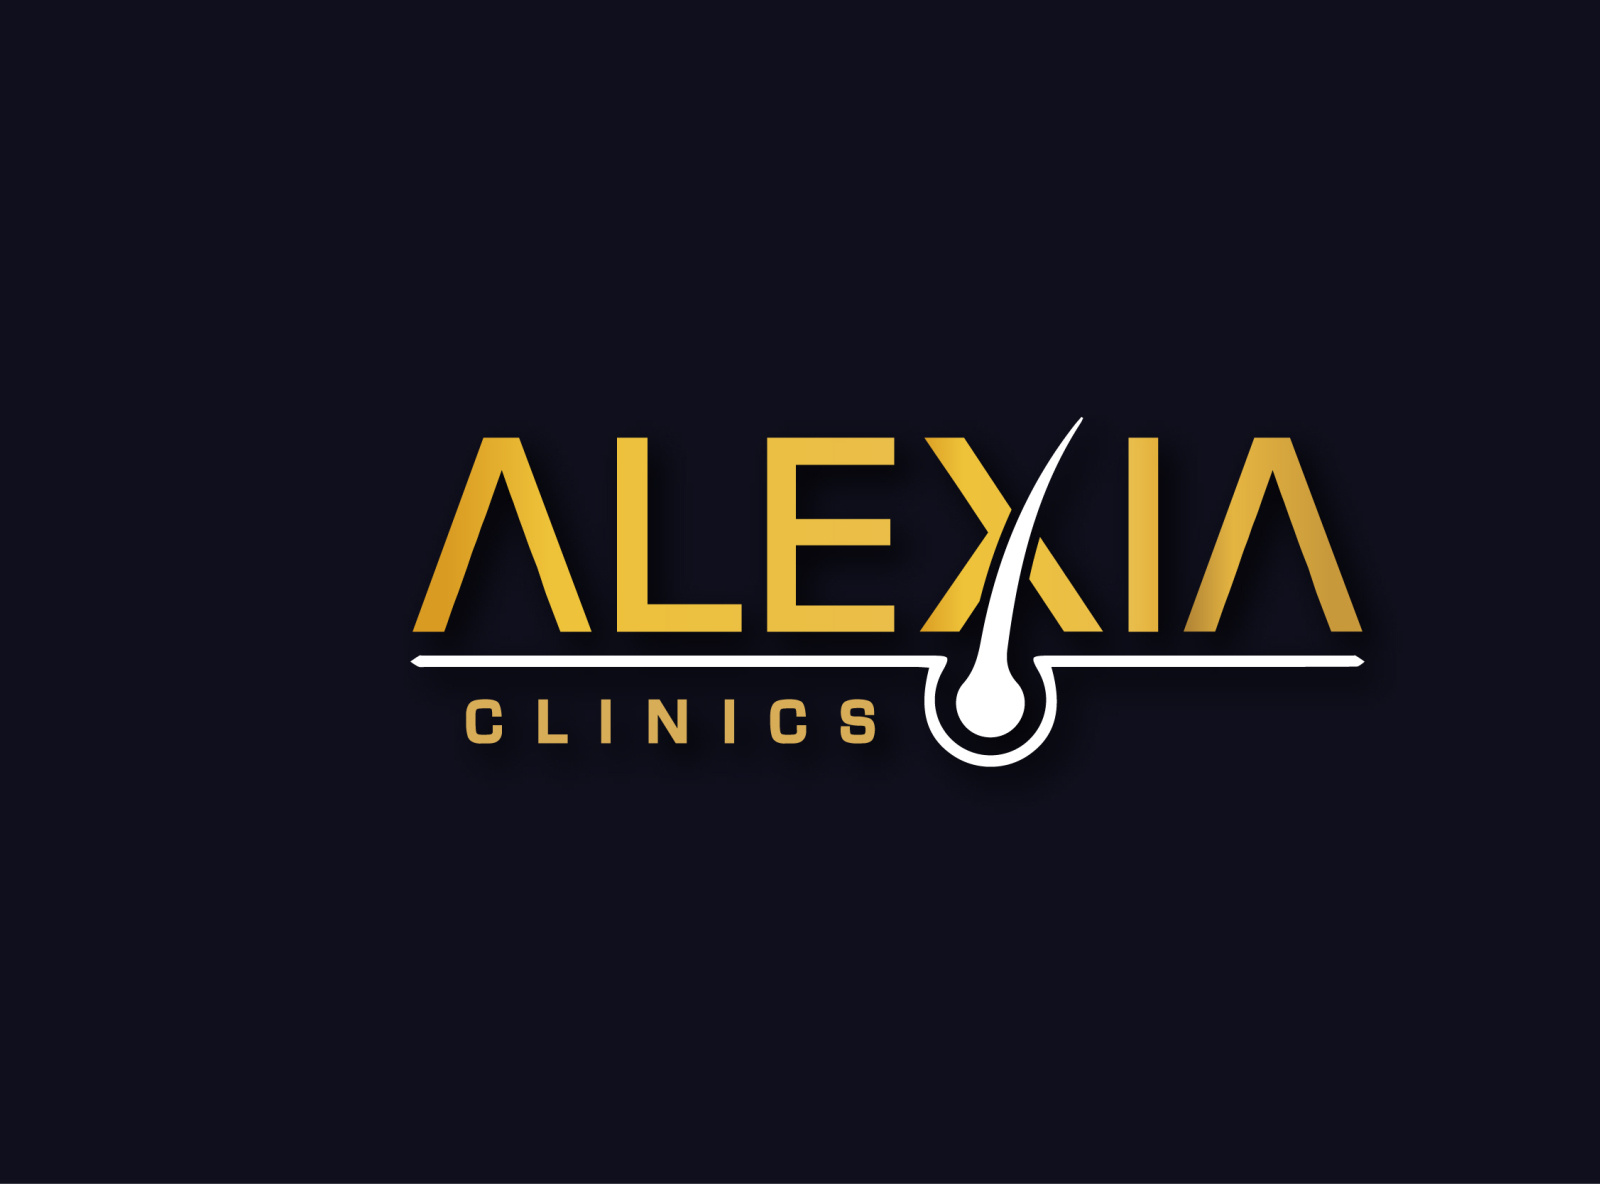 Alexia Clinics Logo by Youssef Maged on Dribbble